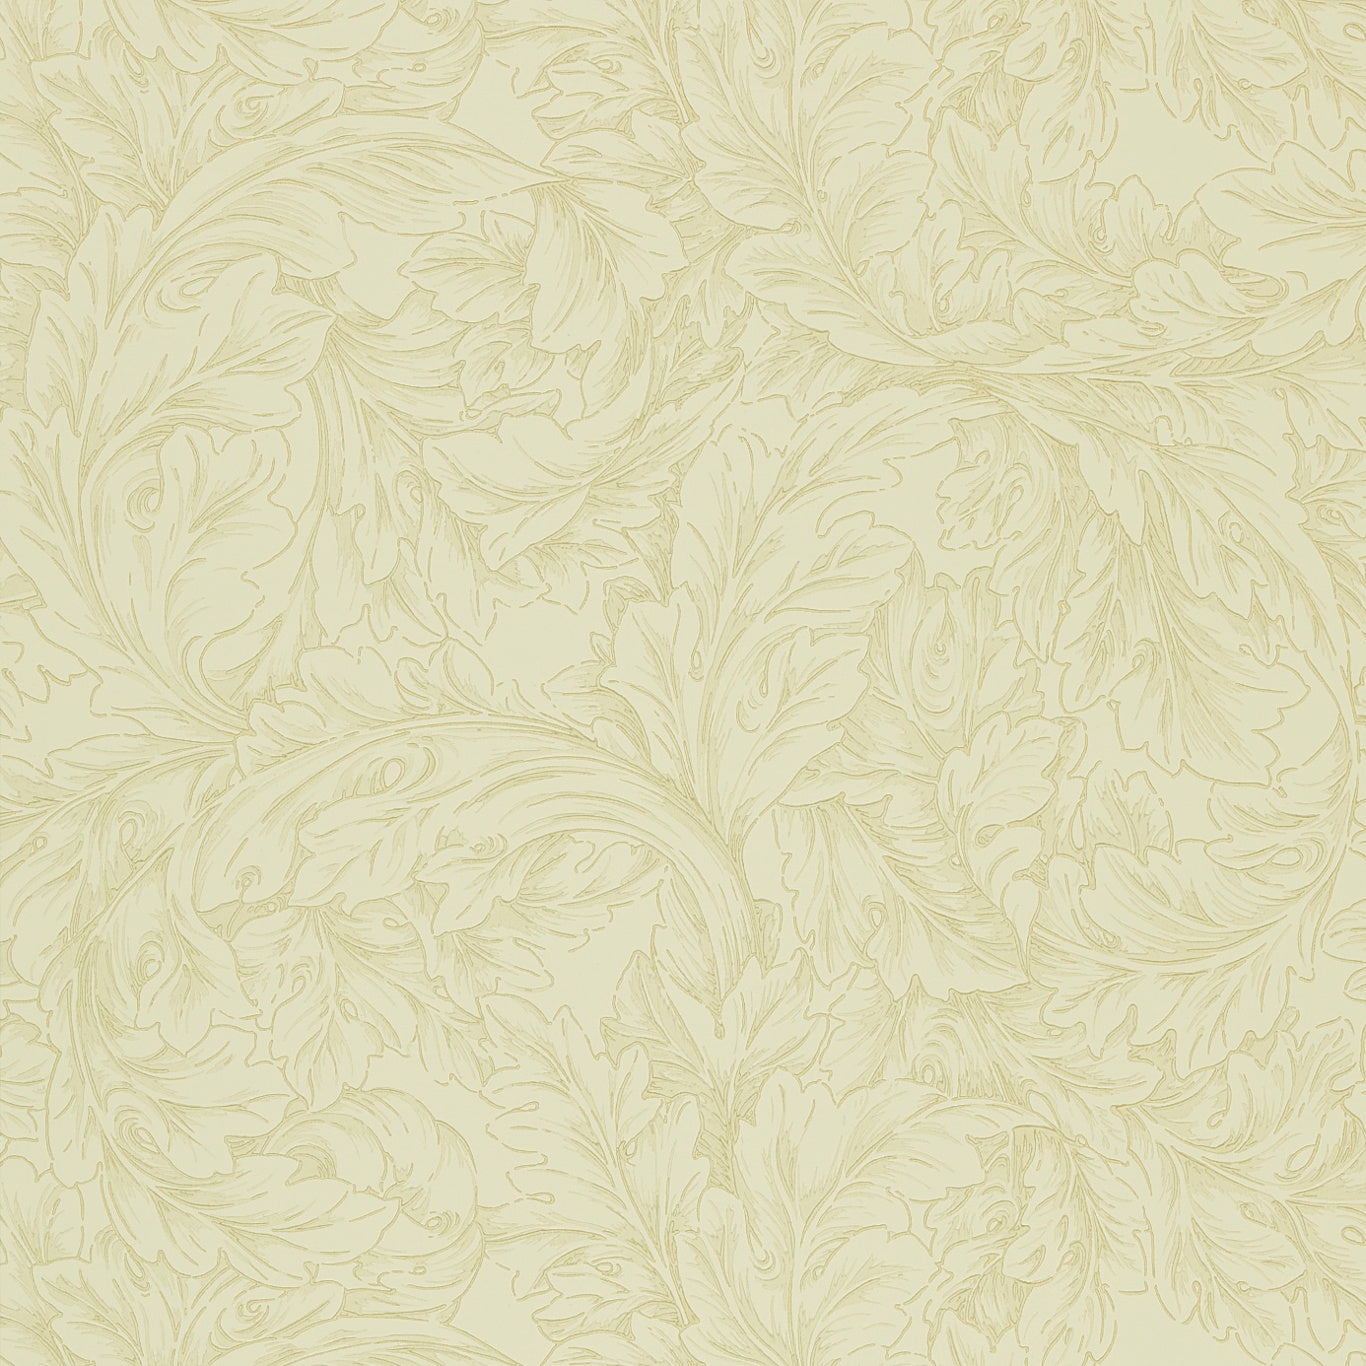 Acanthus Scroll Wallpaper DMORAC102 by Morris & Co